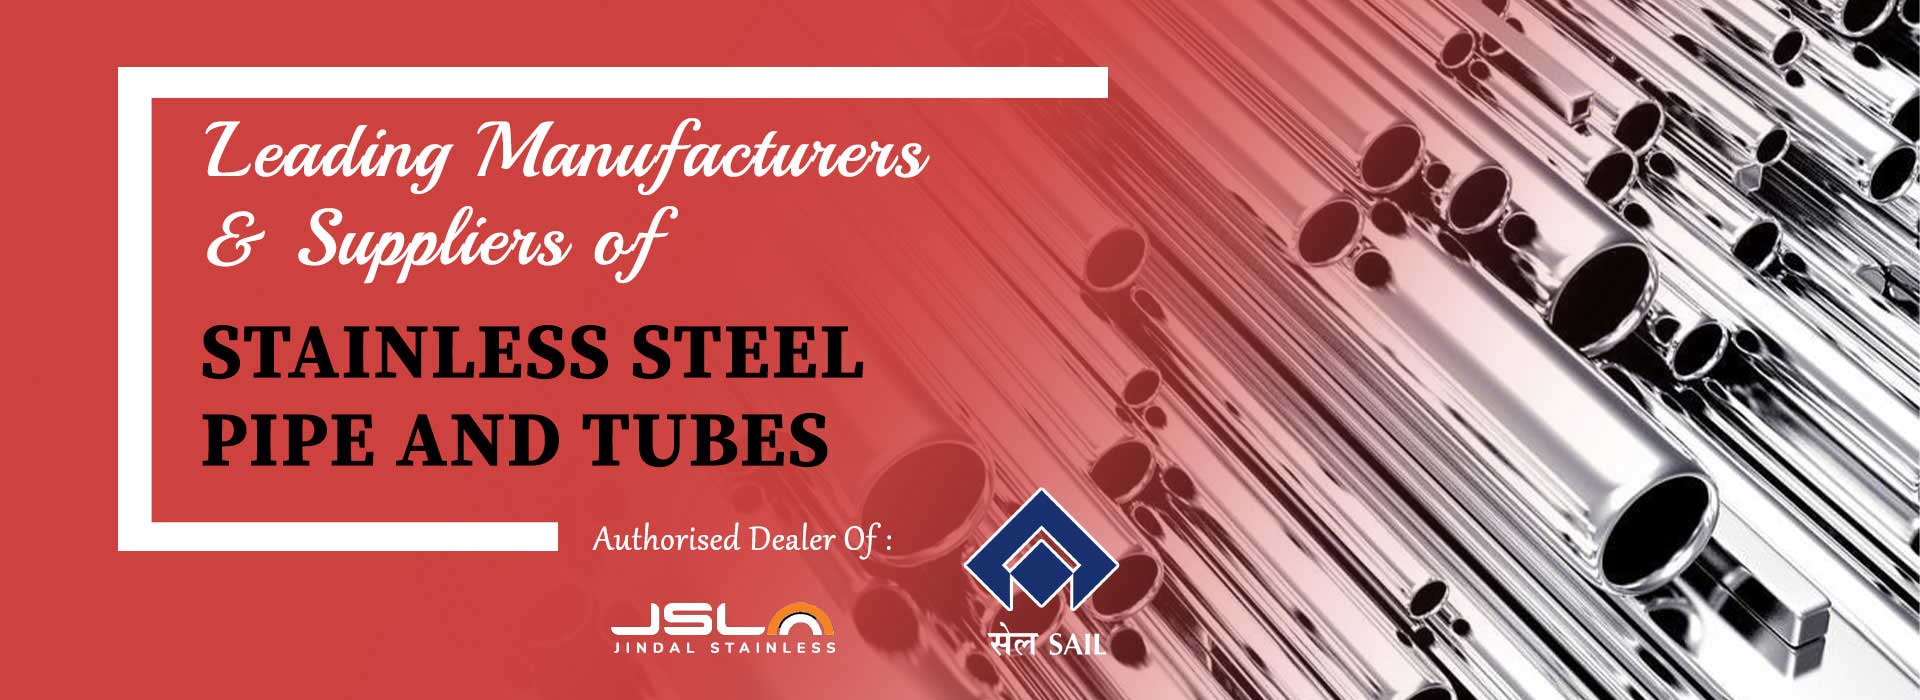 Stainless Steel Pipe and Tubes Manufacturers in Punjab